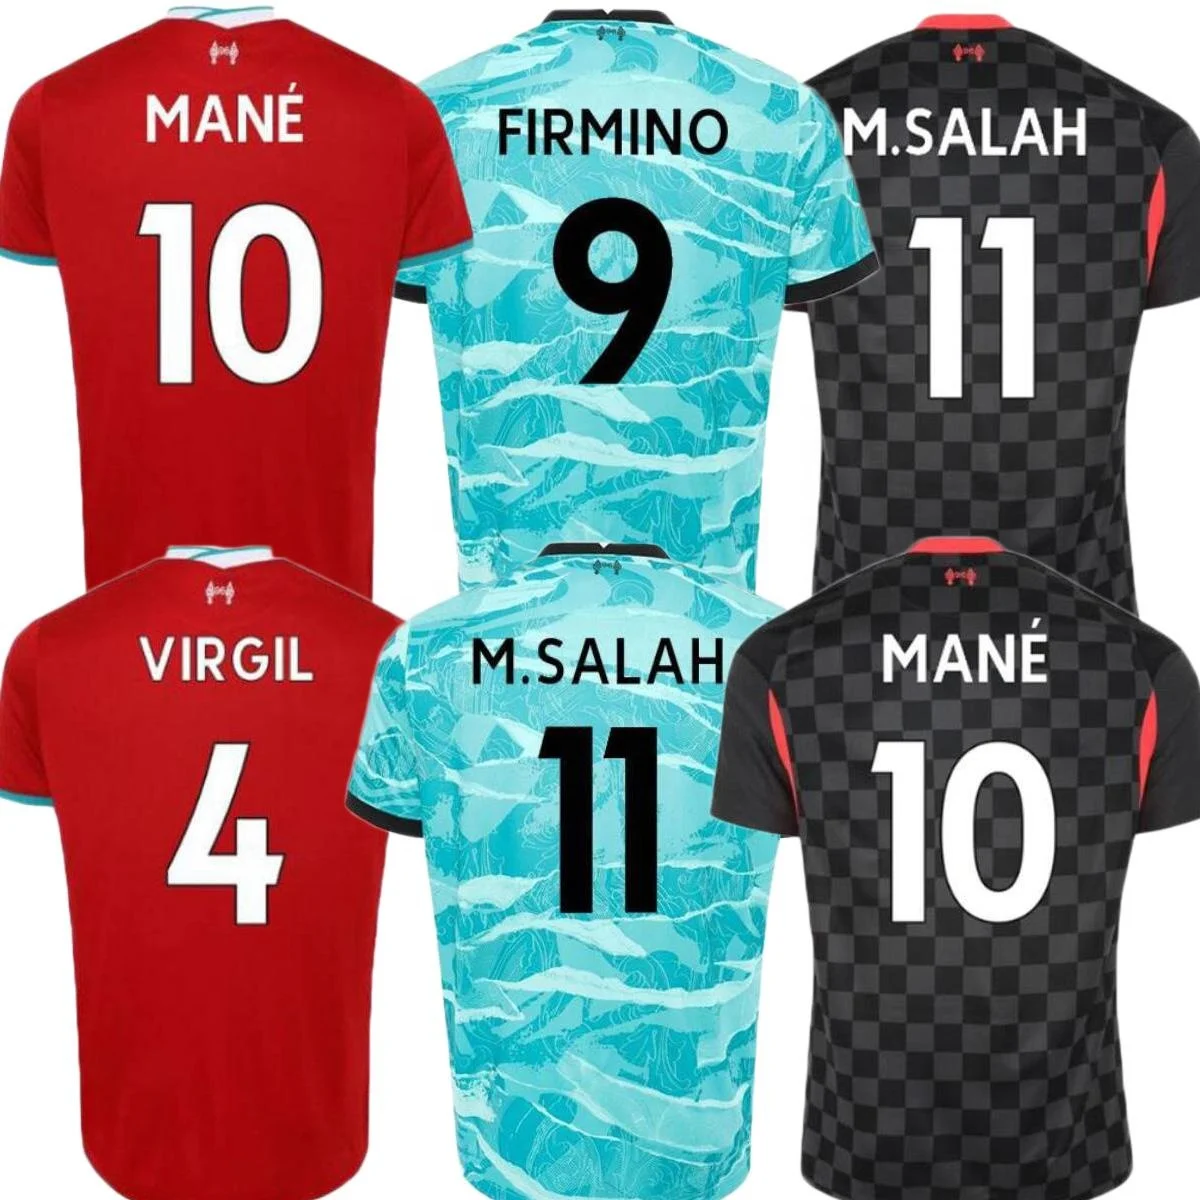 

2021 Real Thailand Quality Soccer uniform hazard Jersey soccer wear paris football printing shirts with name number, All are avaliable